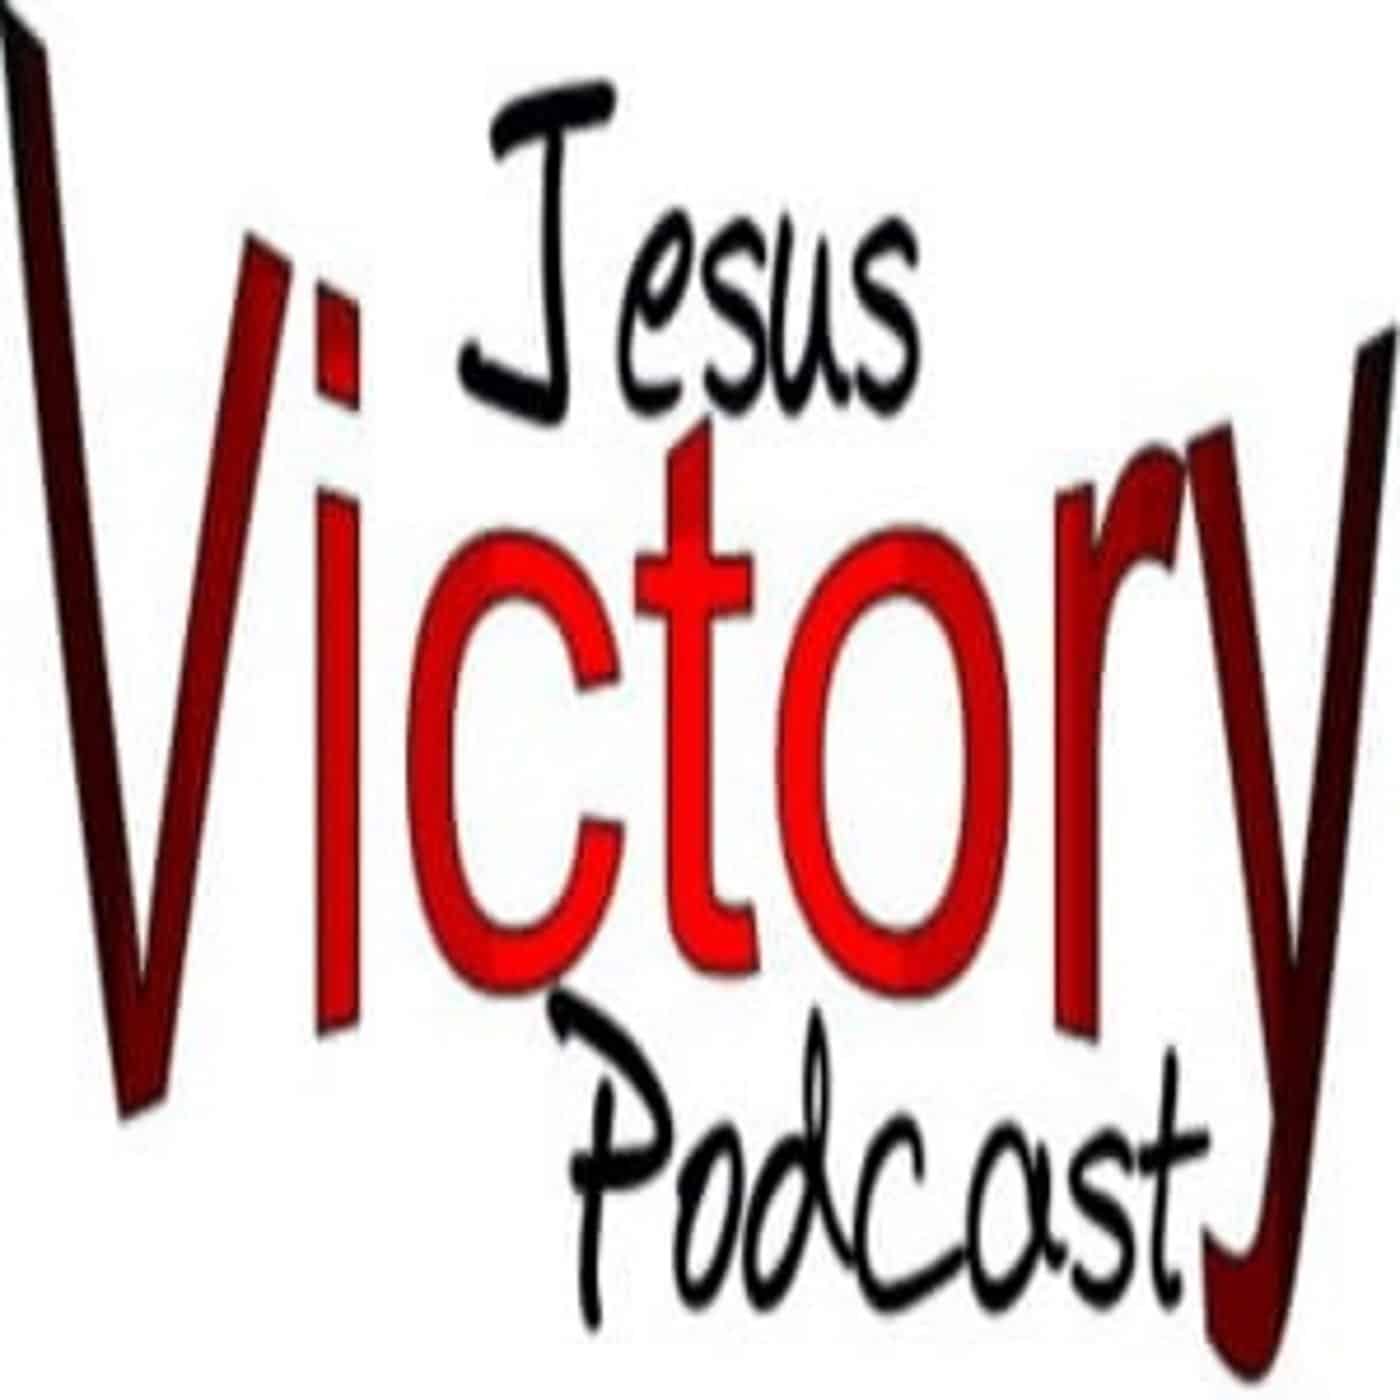 Jesus Victory Podcast from Jesus Victory Centre